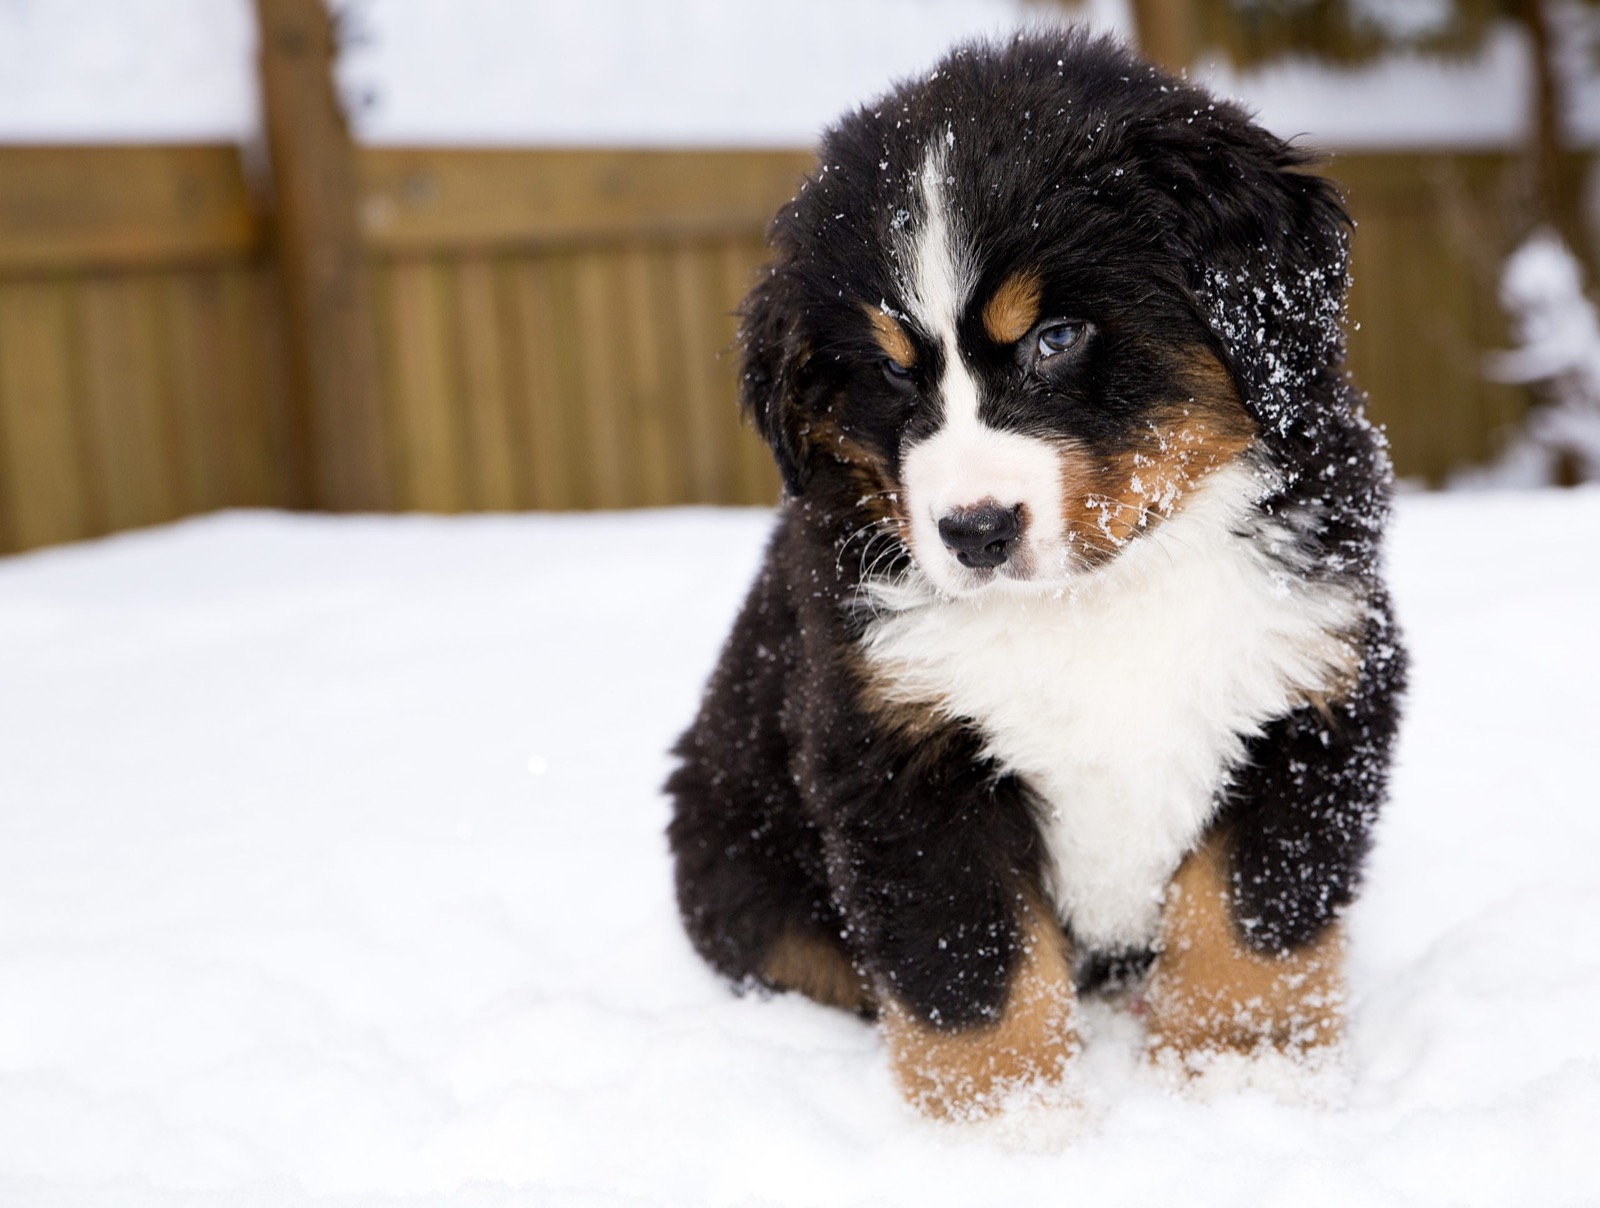 What Wild Animal Are You? Bernese Mountain Dog Puppy